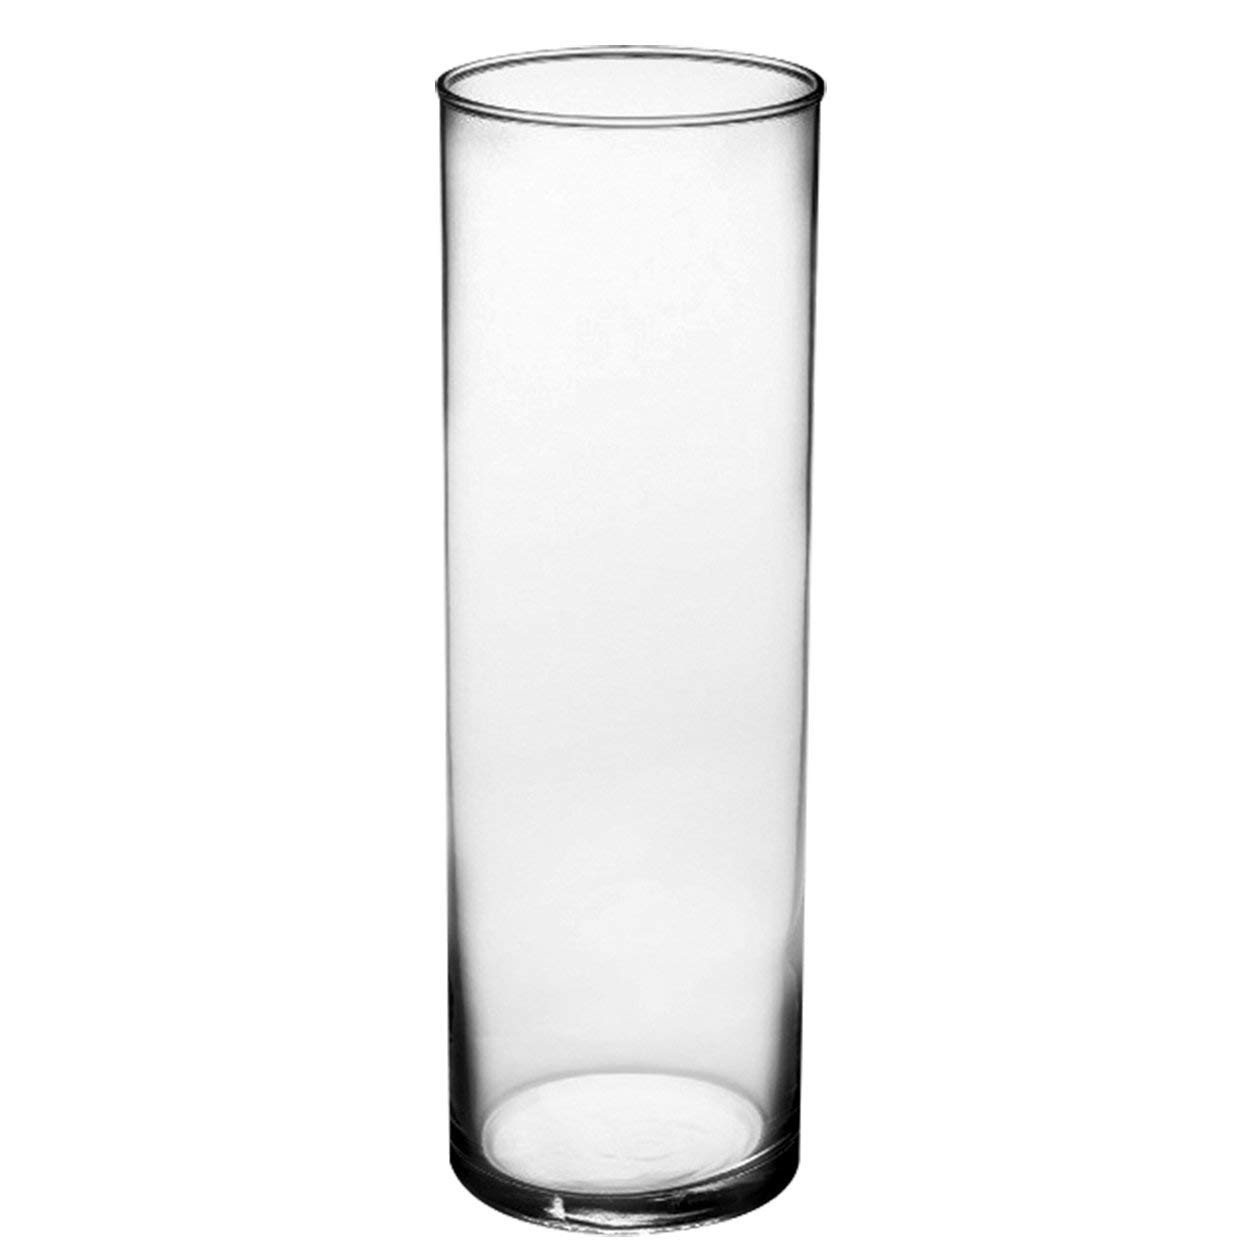 13 Spectacular Long Tall Glass Vases 2024 free download long tall glass vases of amazon com syndicate sales 3 1 2 x 10 1 2 cylinder vase clear throughout amazon com syndicate sales 3 1 2 x 10 1 2 cylinder vase clear planters garden outdoor